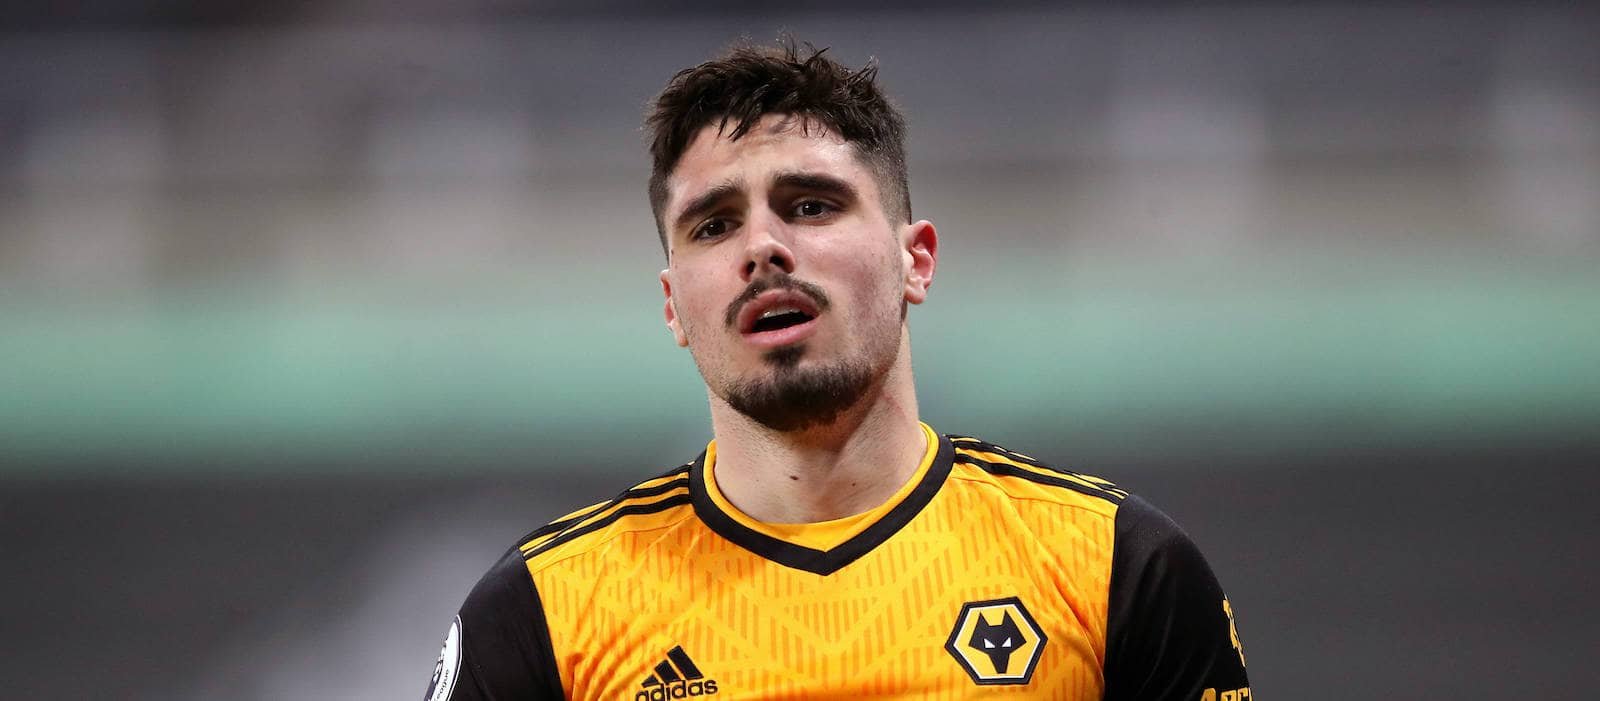 Manchester United could turn to Wolves ace Pedro Neto if Jadon Sancho leaves in January – Man United News And Transfer News